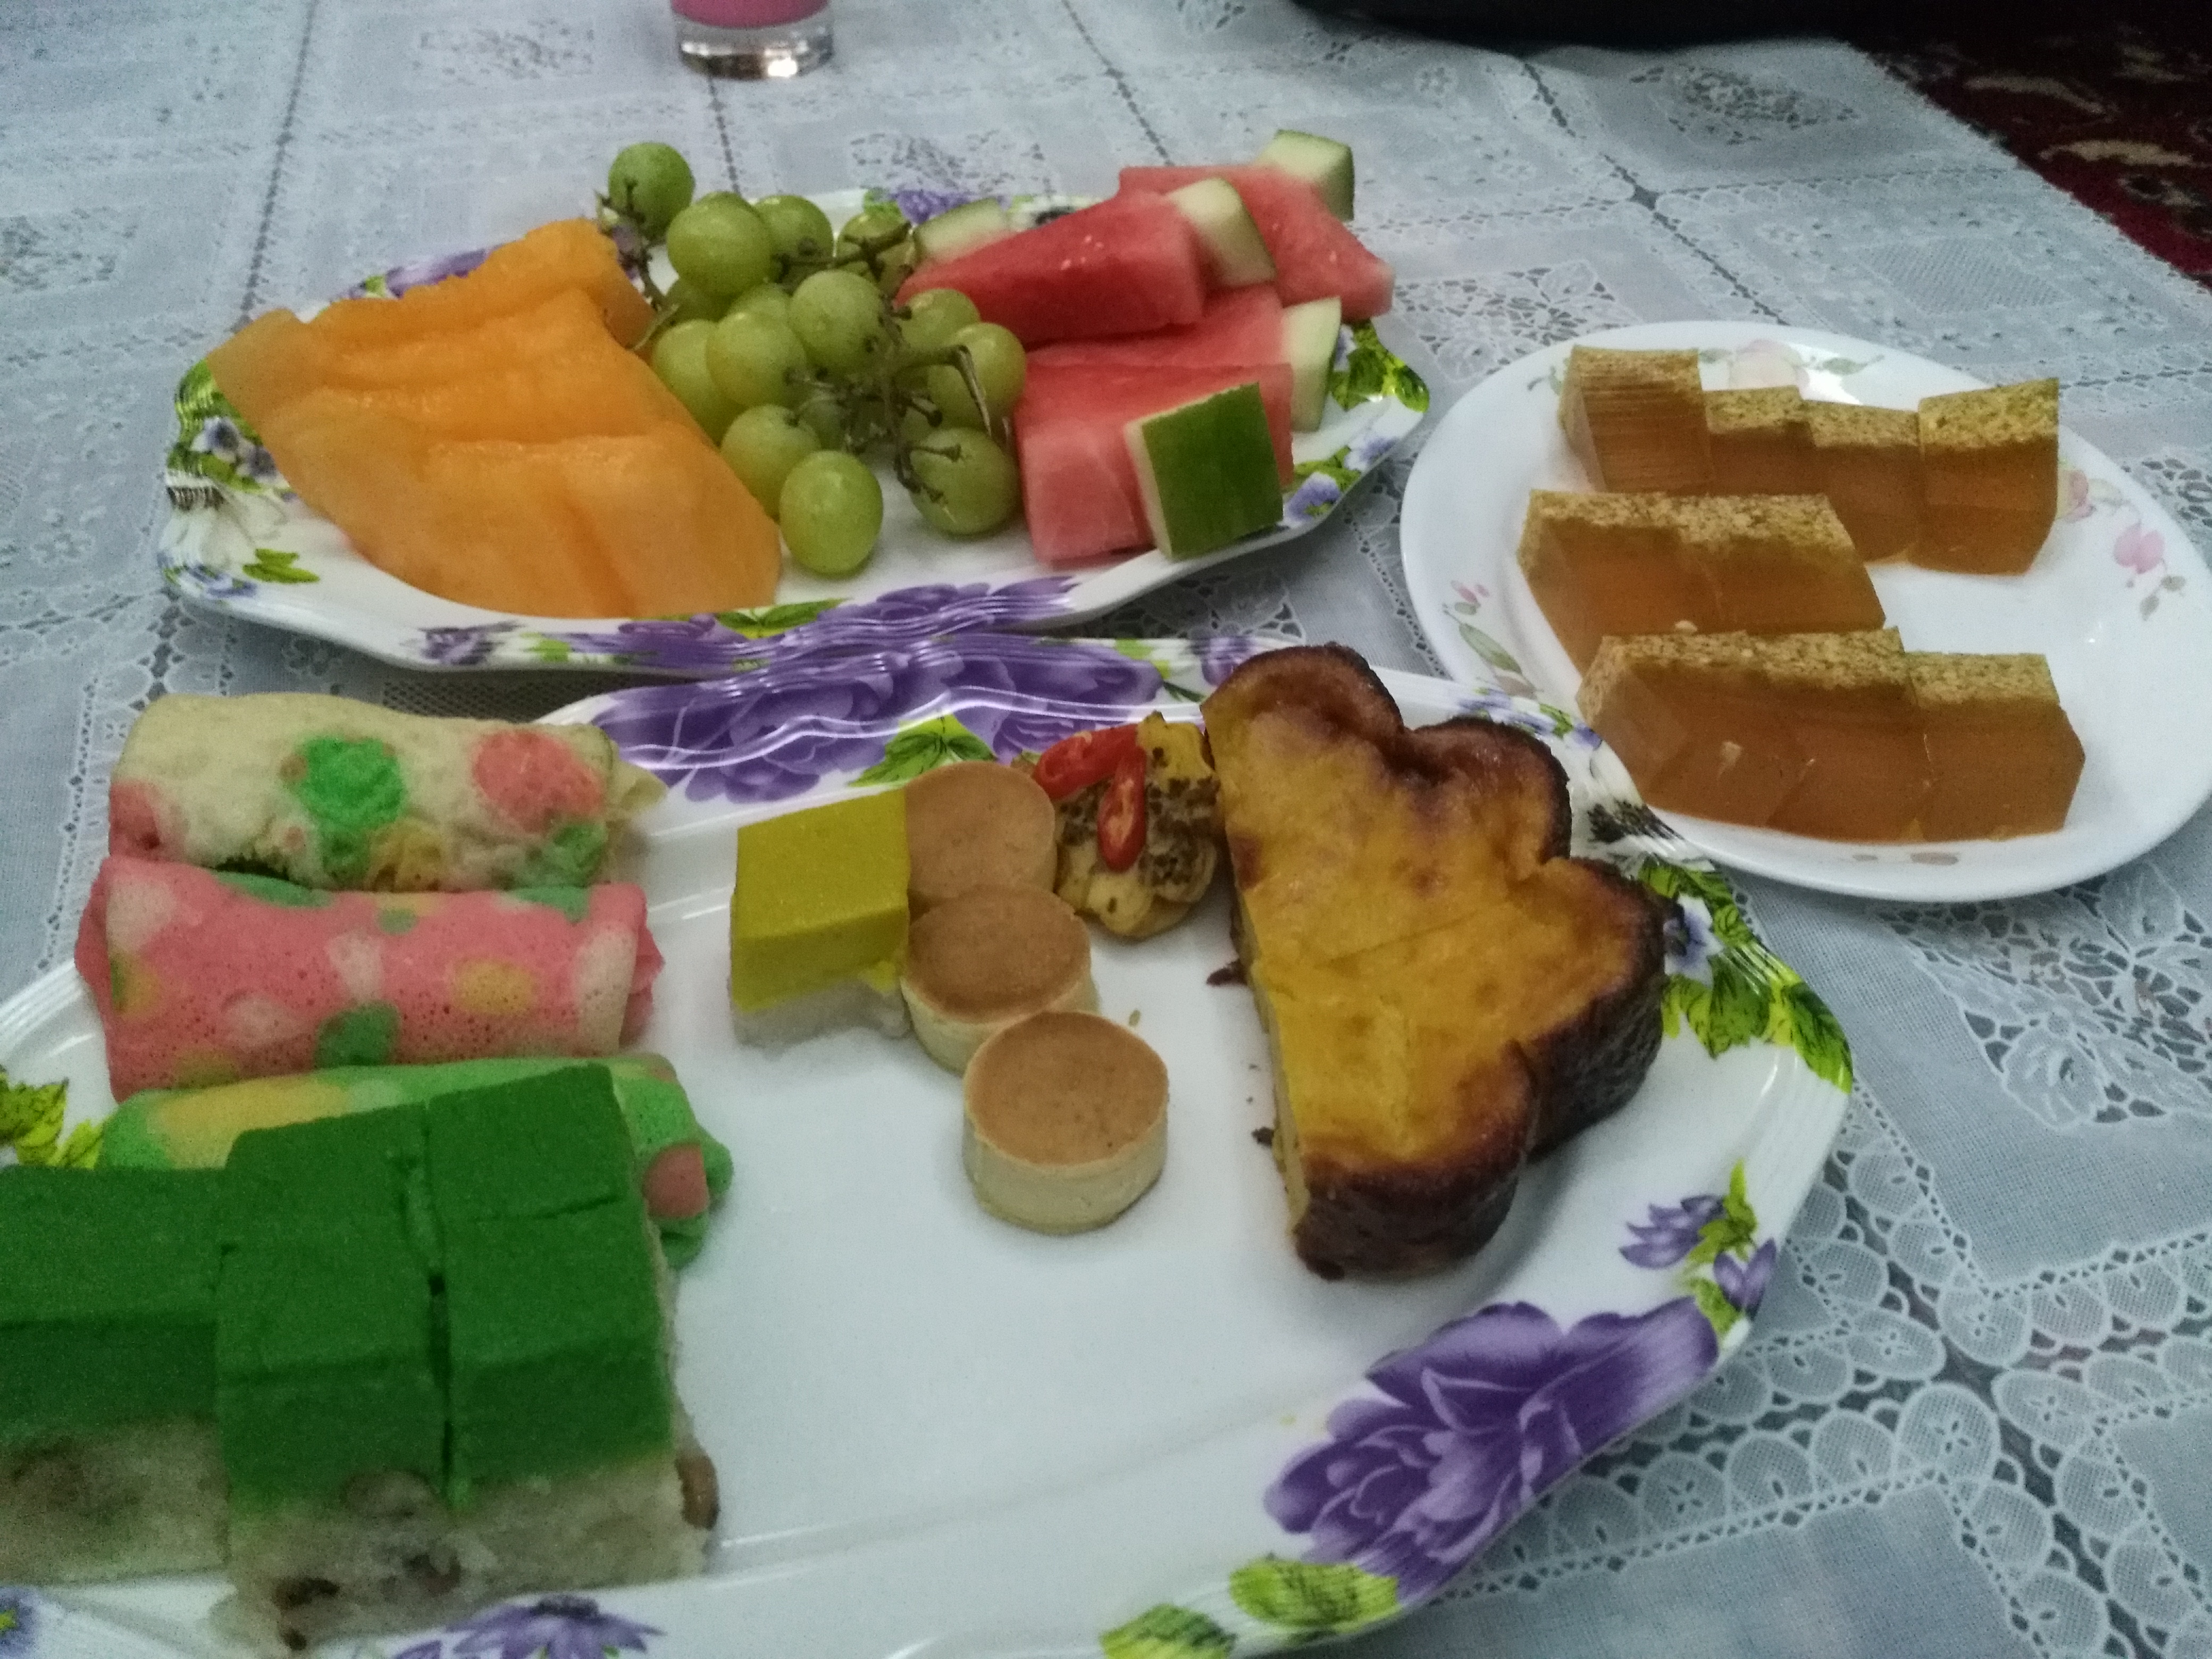 An assortment of Malay sweets.